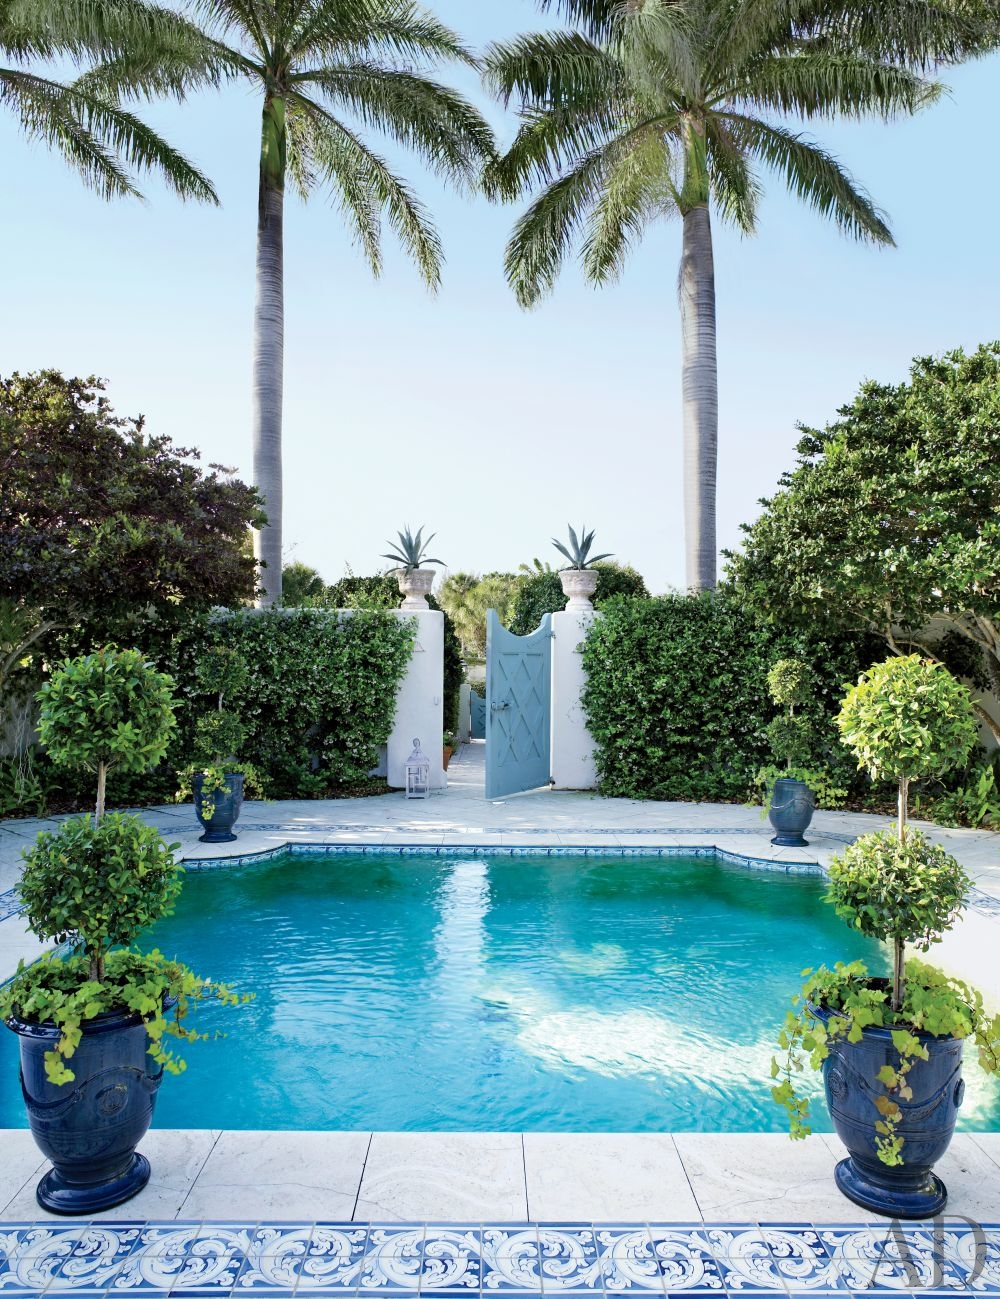 how to decorate around your pool | BetterDecoratingBible